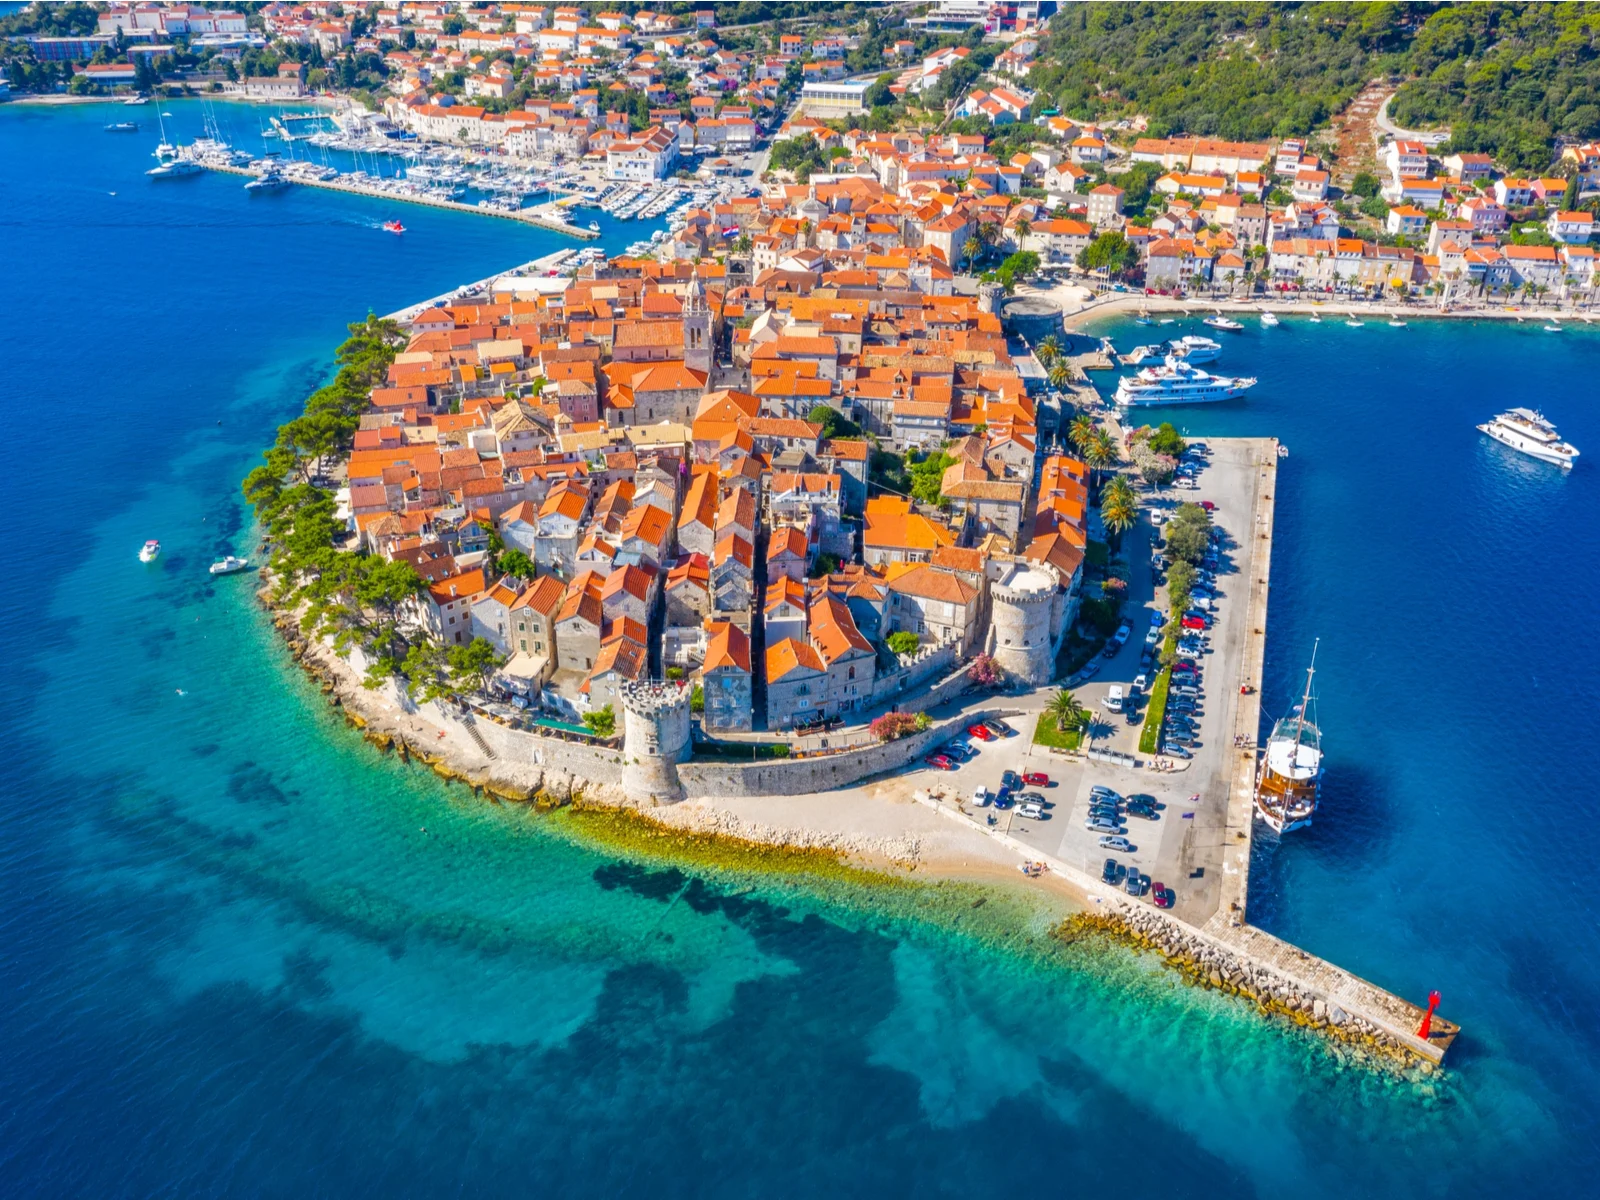 Korcula Island, one of Croatia's best things to do, pictured from the air